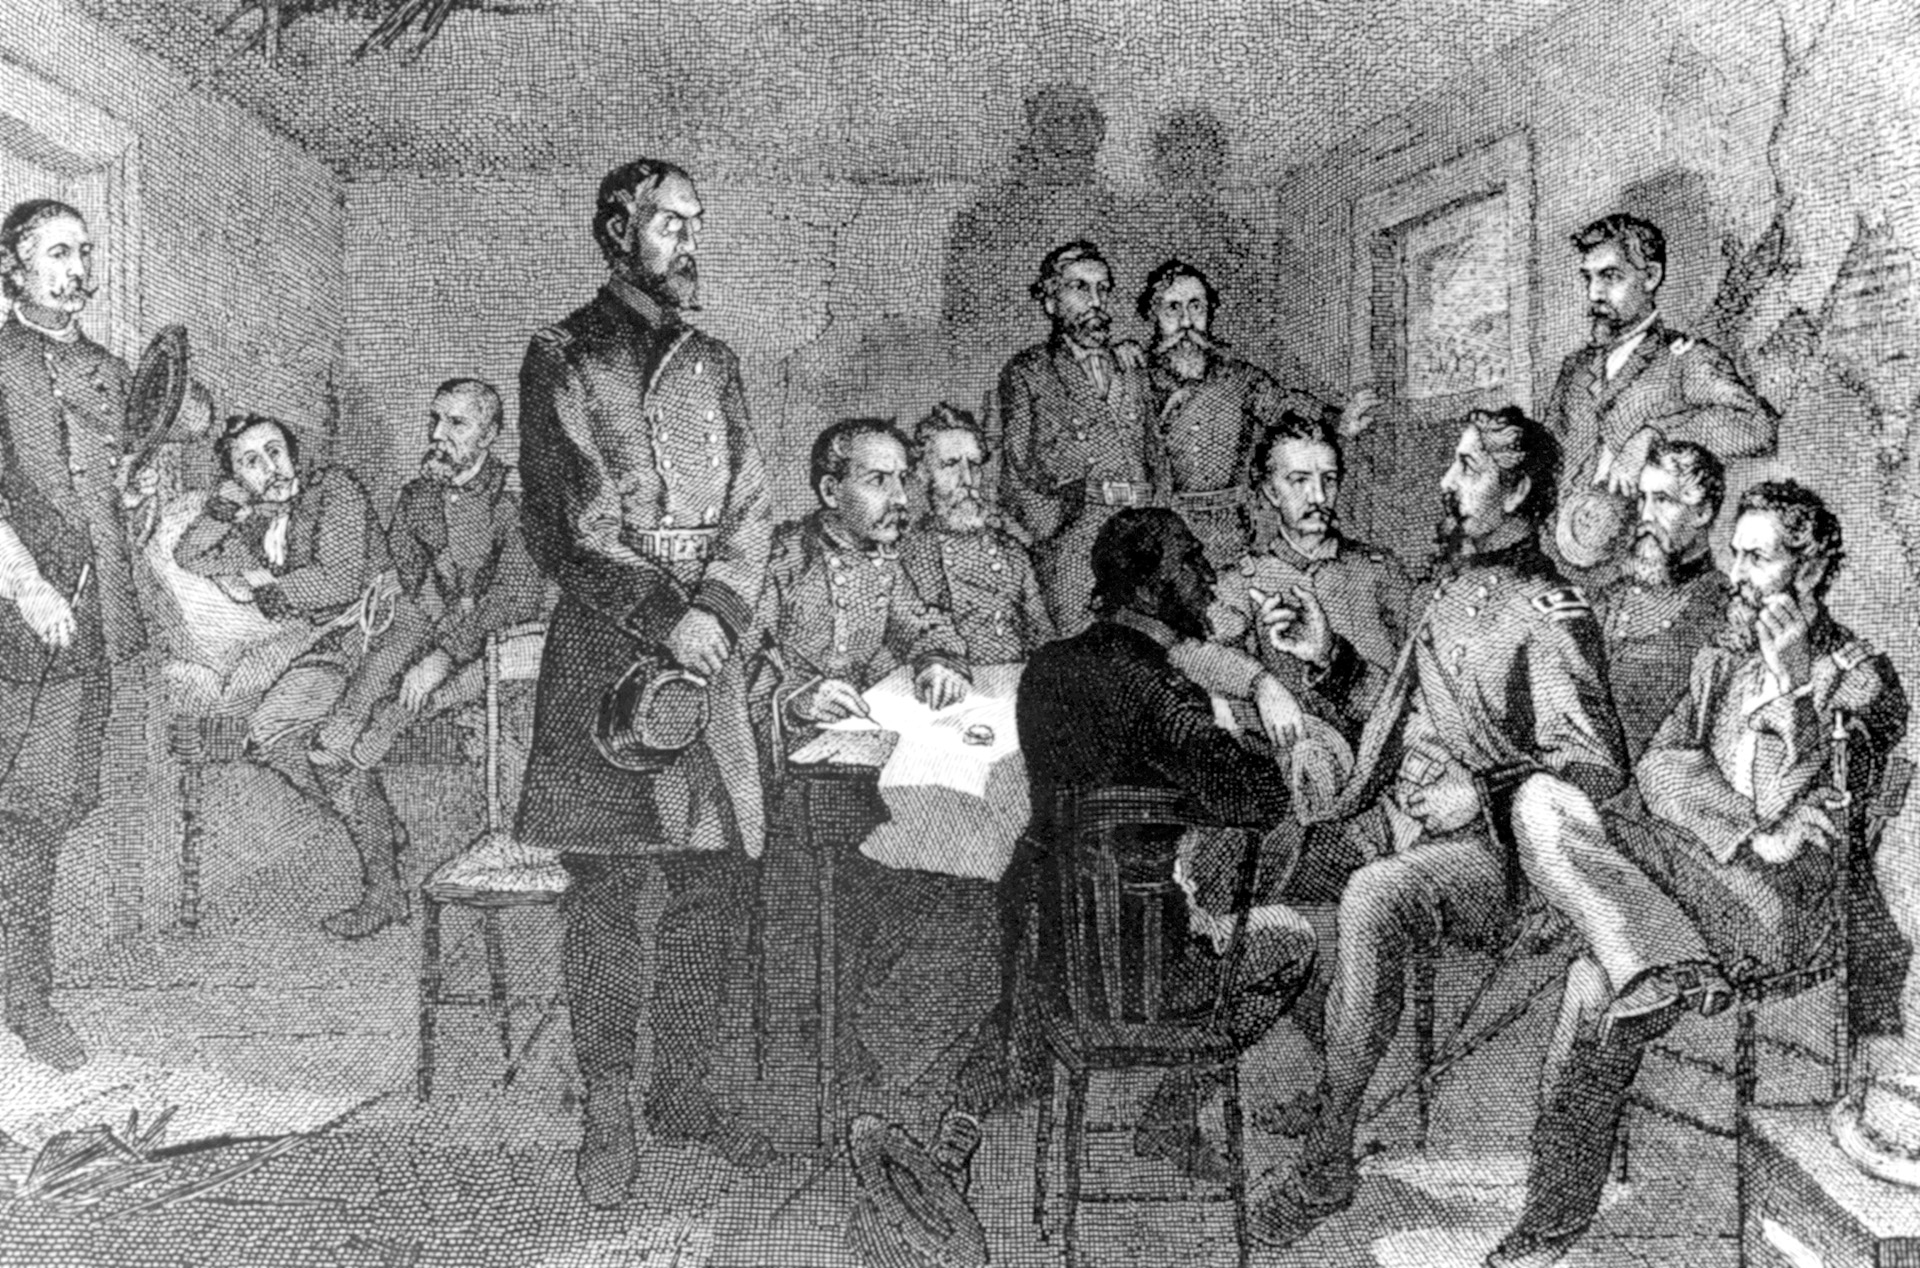 After the second day, General Meade called his subordinates to a farmhouse behind Cemetery Ridge for a conference. Hancock (shown here responding to the standing Meade) concurred that the army should not retreat, but said that neither could it remain idle for very long. 